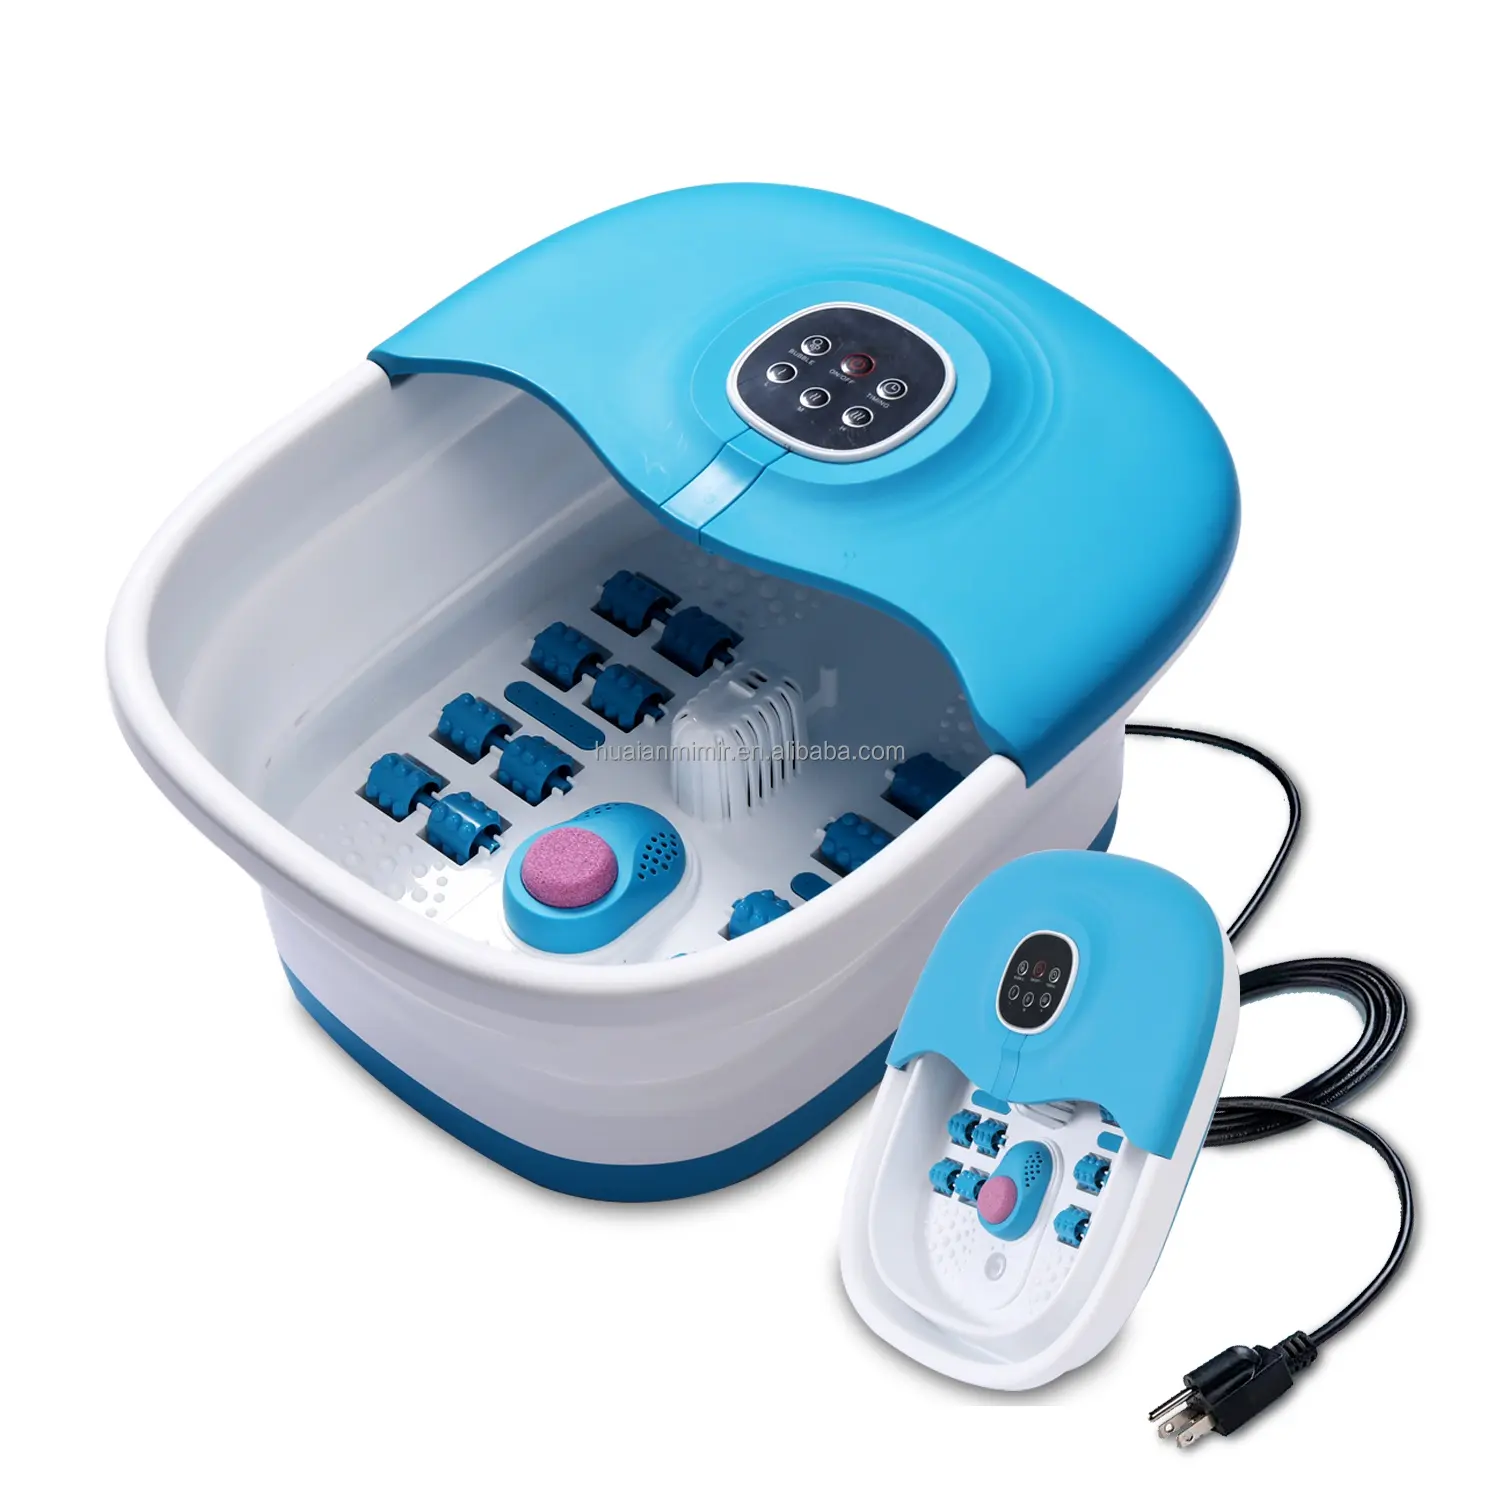 Amazon Hot Selling Electric Heat Foldable Foot Spa Bath Massage Machine With Bubble For Tired Feet Relax Soaking Basin